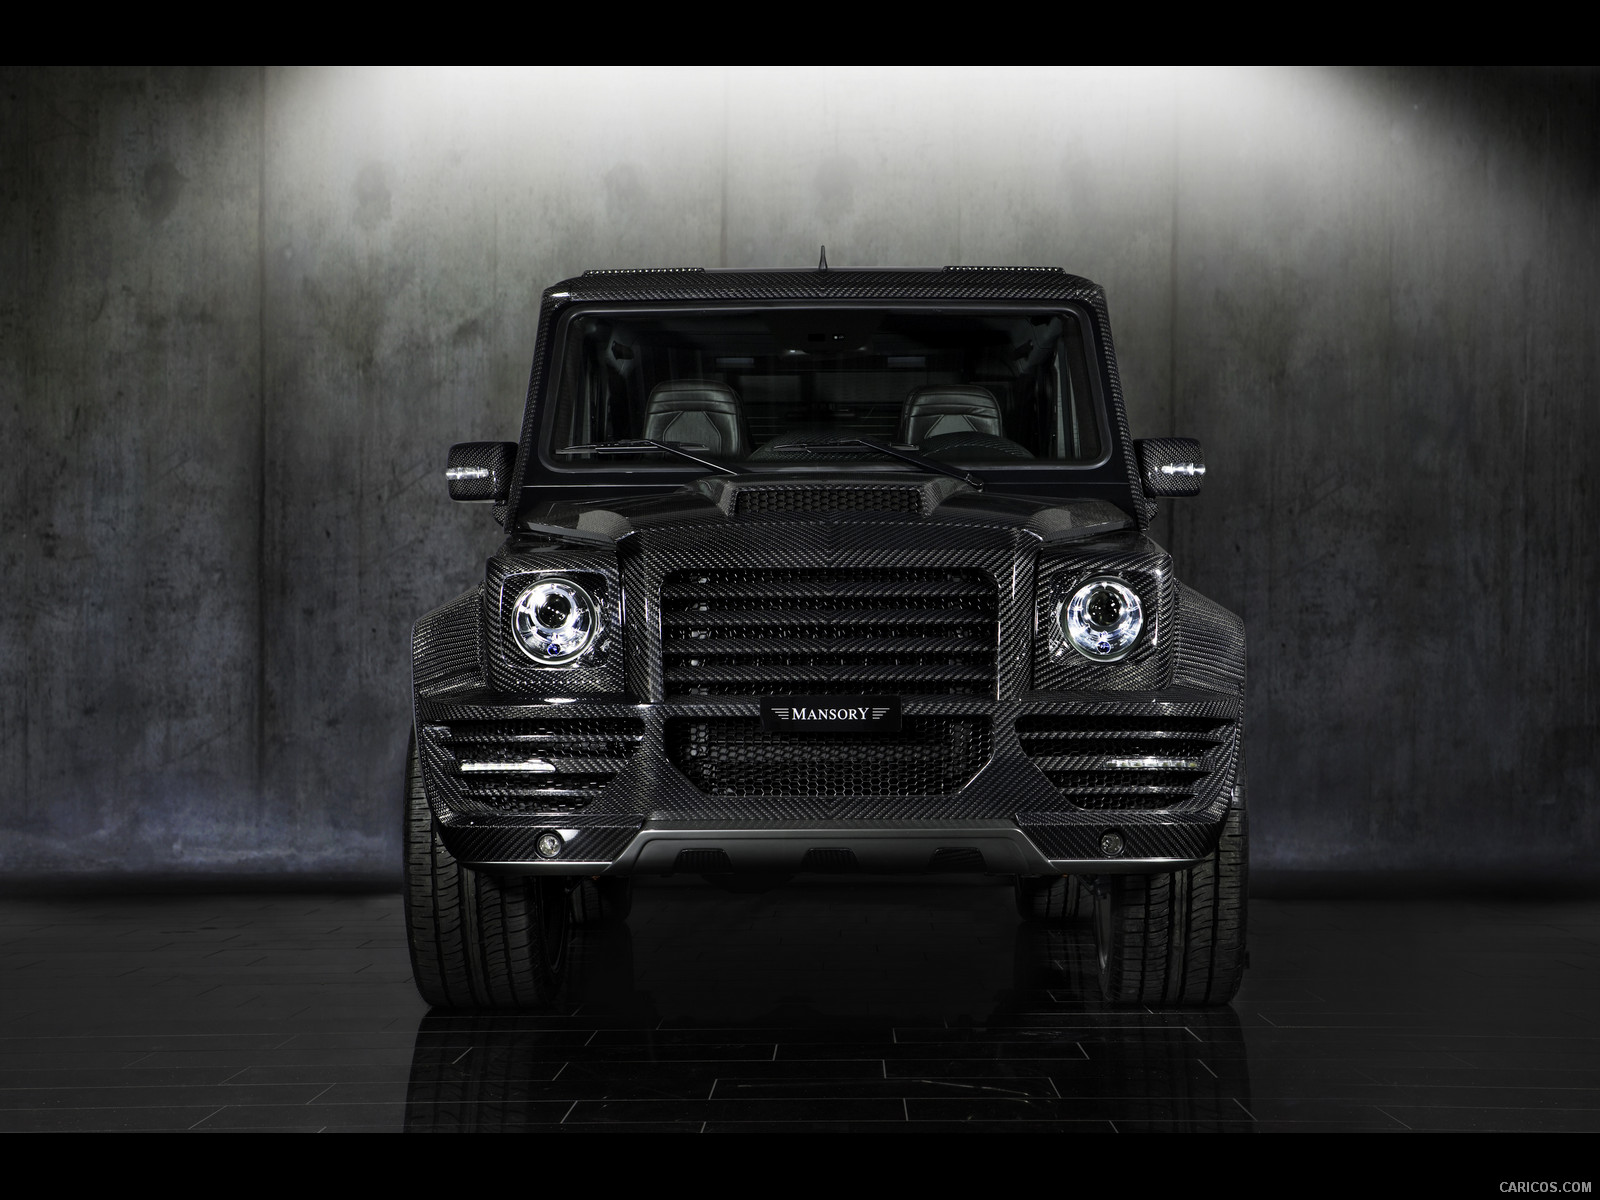 Mansory G-Couture based on Mercedes G-Class  - Front, #4 of 39